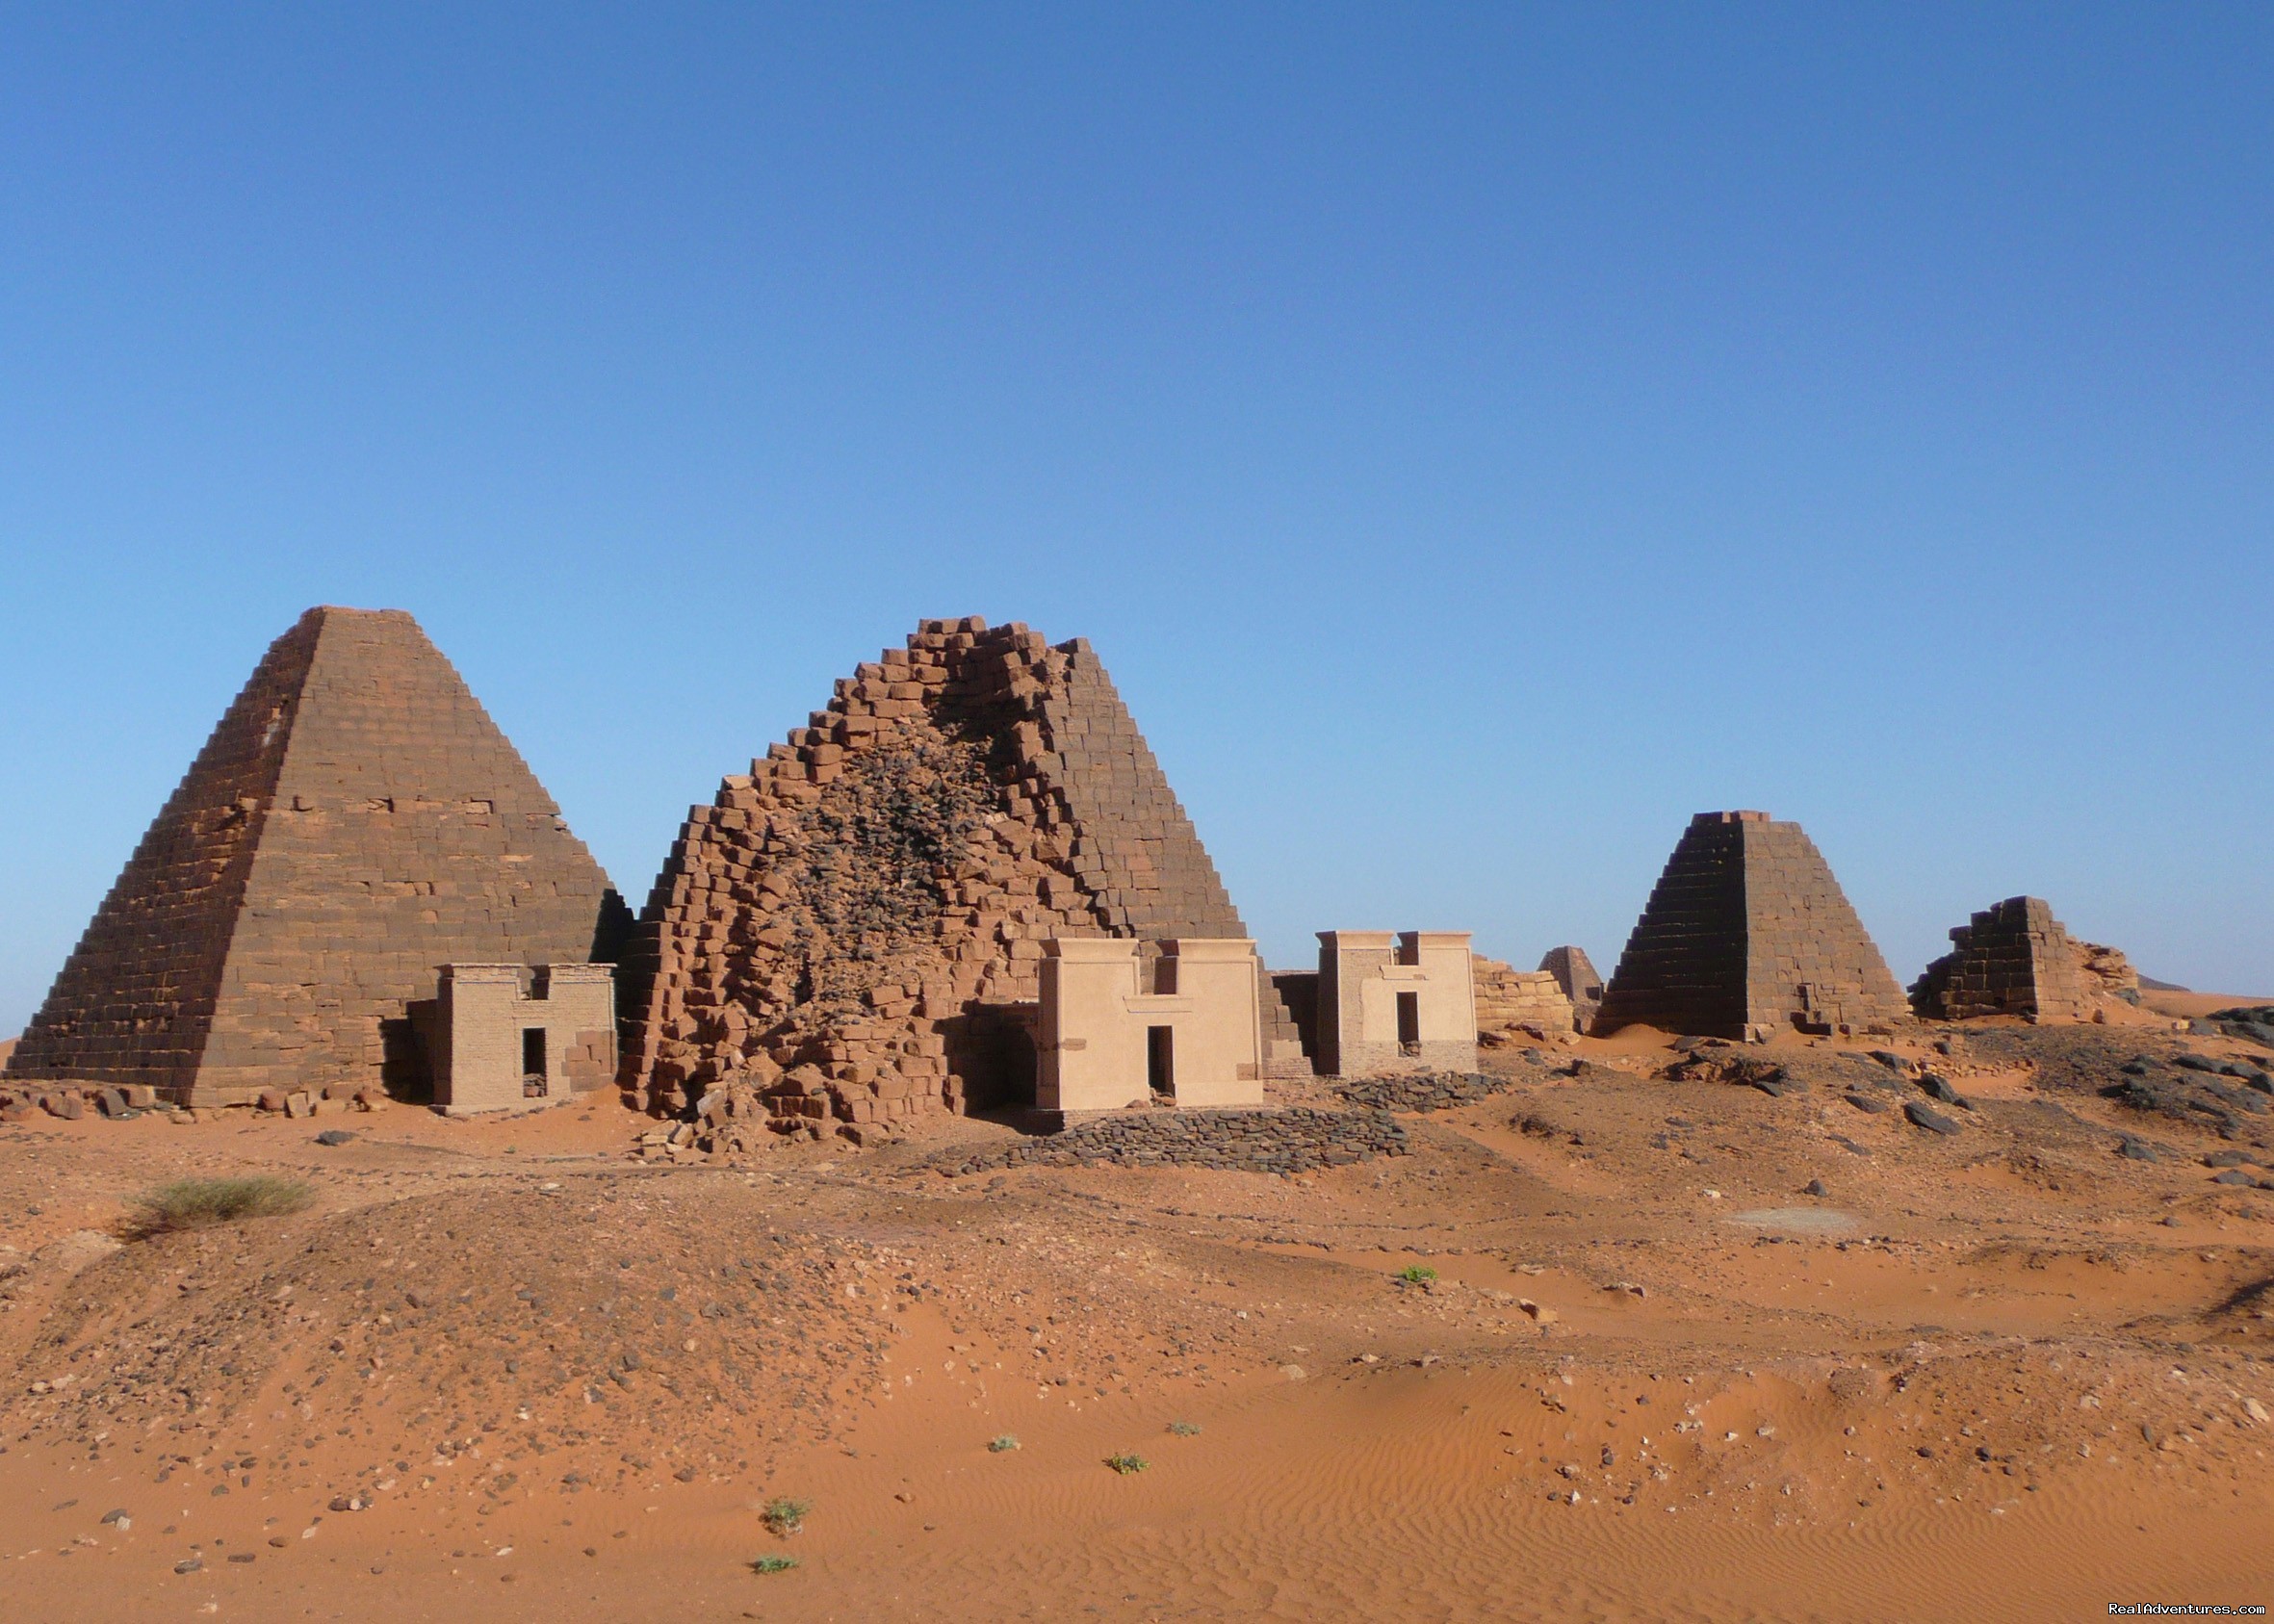 Tours To Pyramids And Archeological Sites Omdurman Sudan Sight Seeing